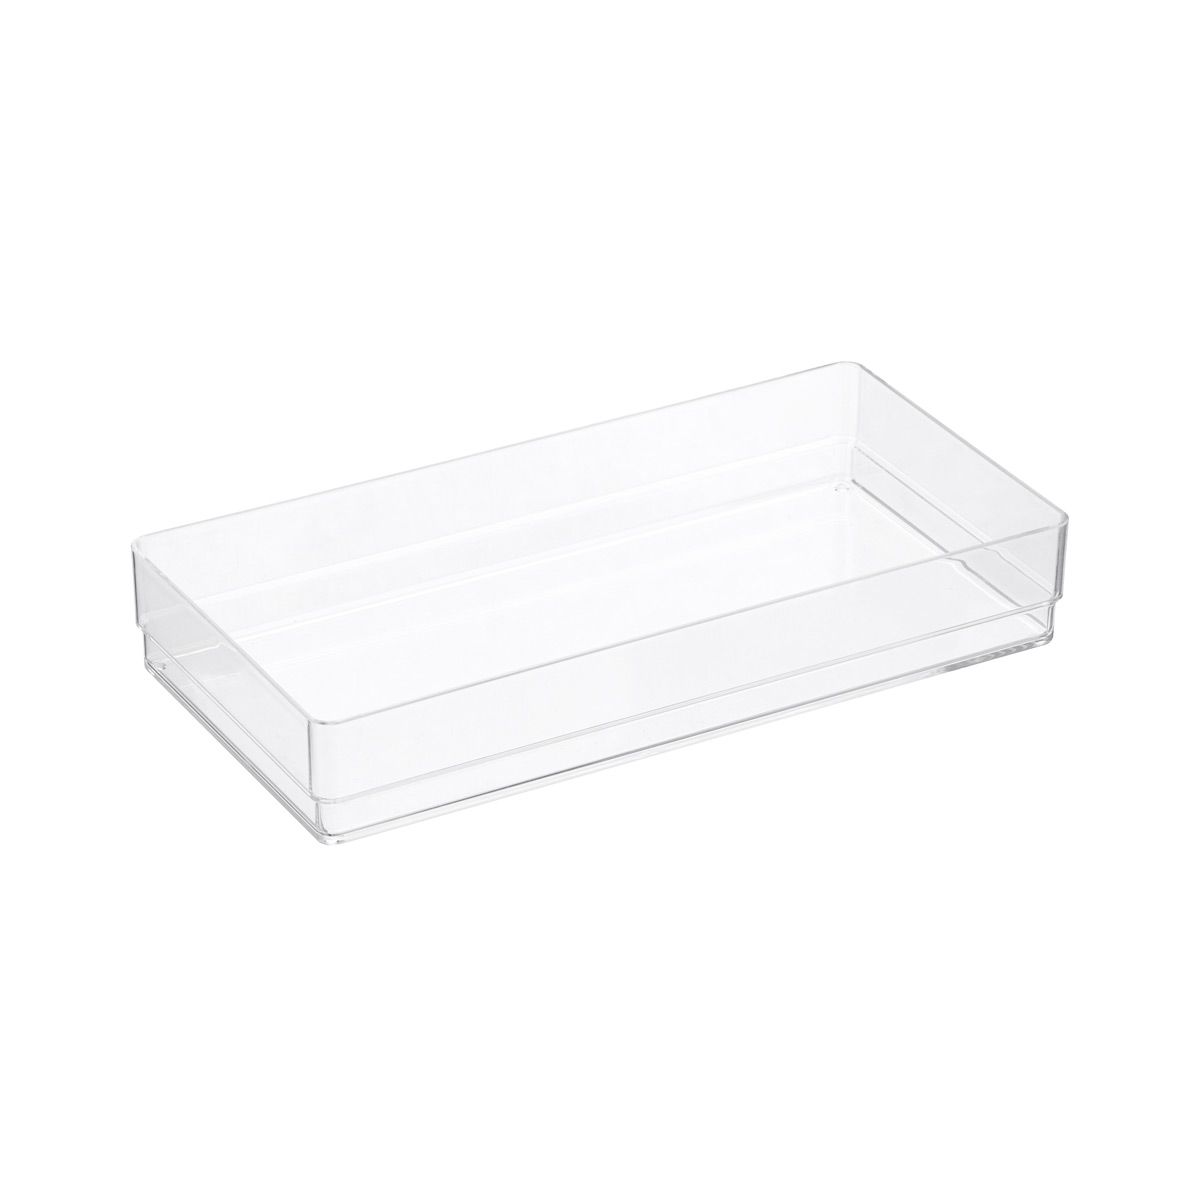 Acrylic Drawer Organizer | The Container Store